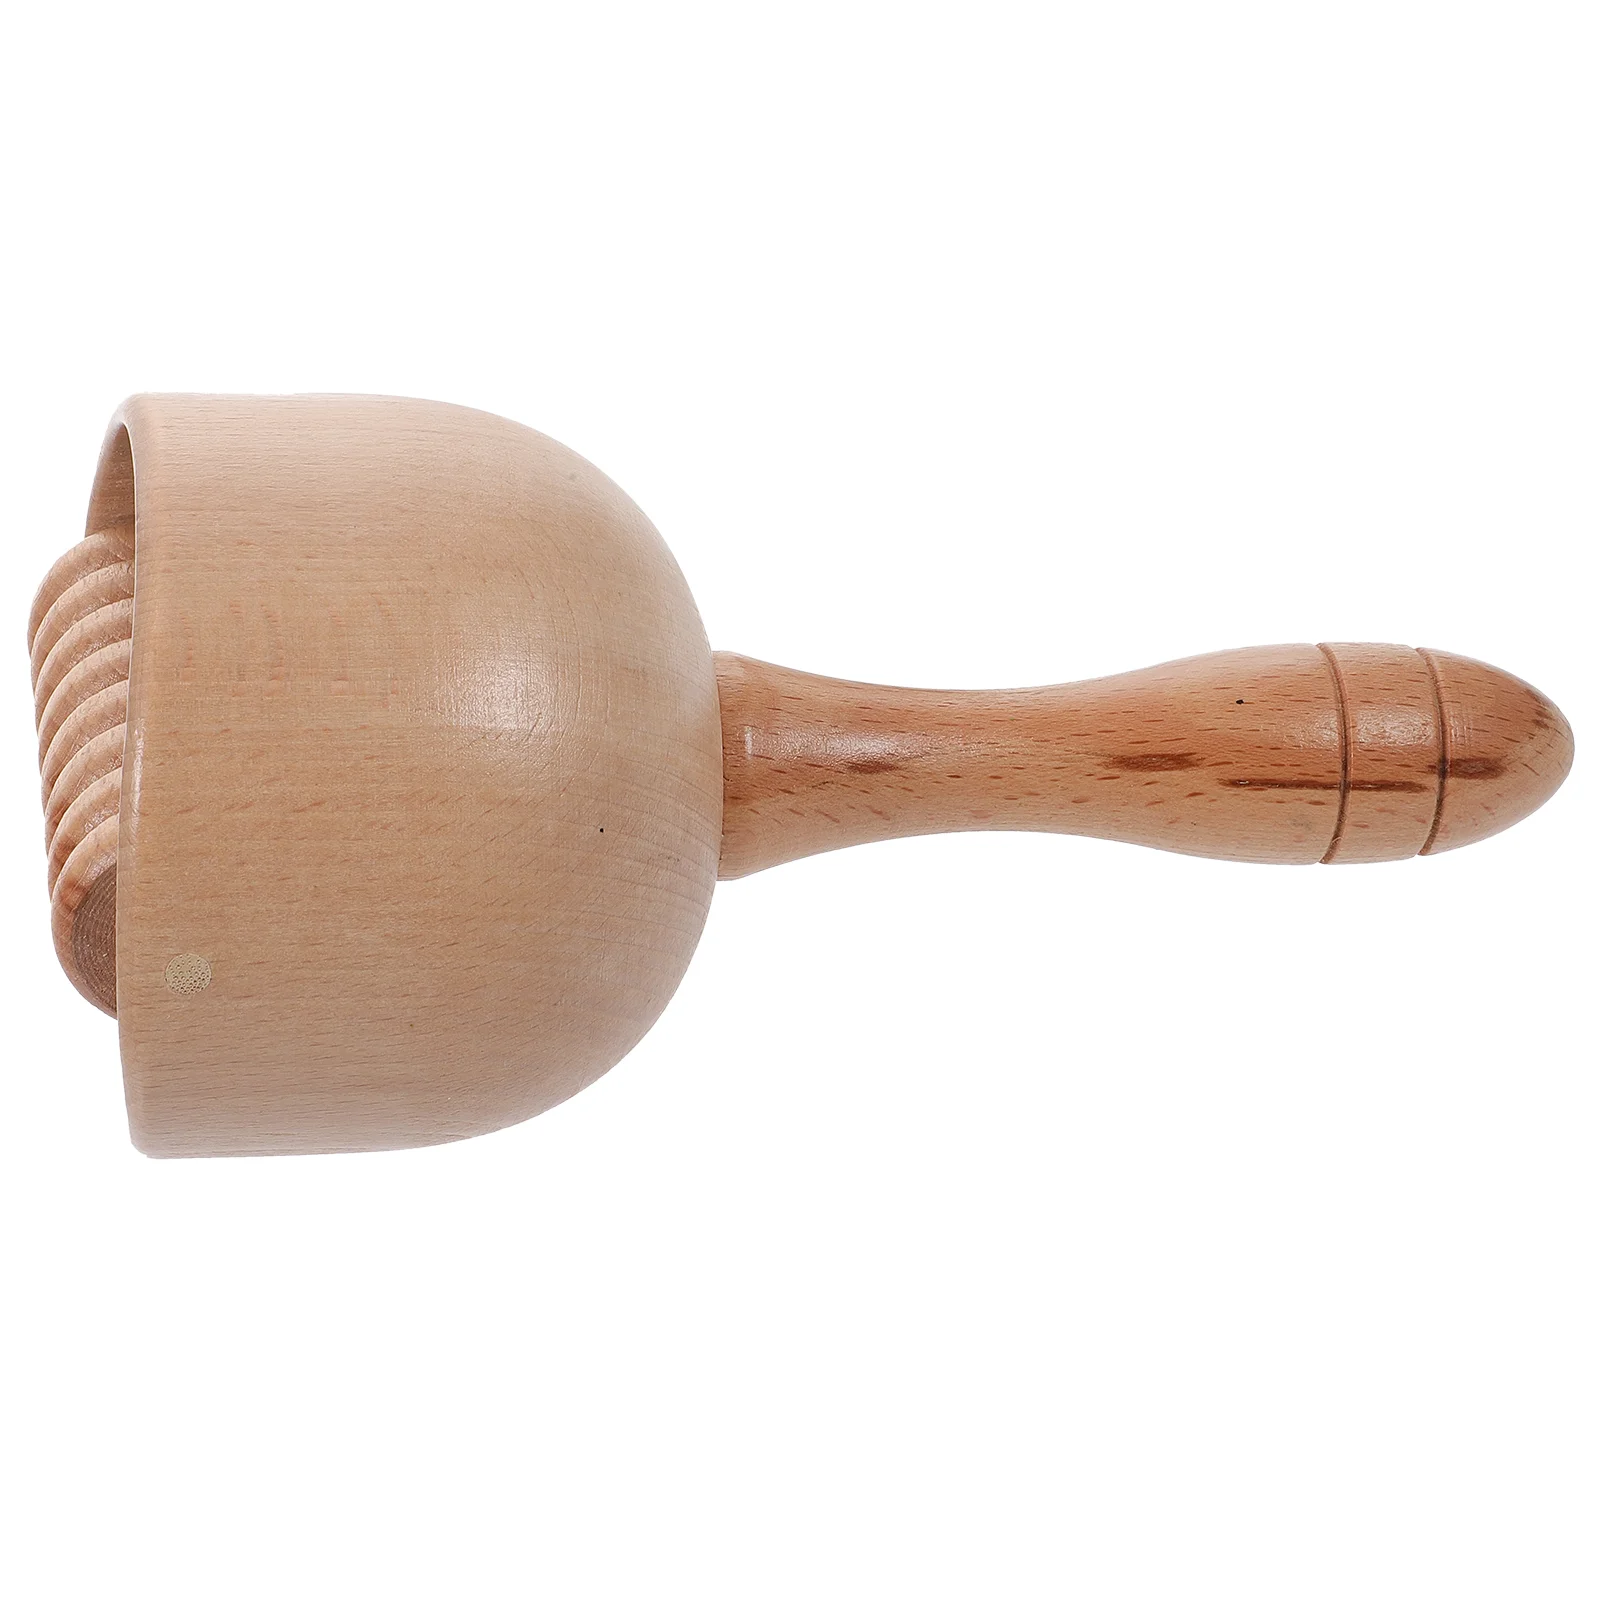 

Wood Tools Roller Cup Body Wooden Muscle Rod Tool Stick Lymphatic Drainage Manual Cups Scraping Handheld Belly Swedish Sticks